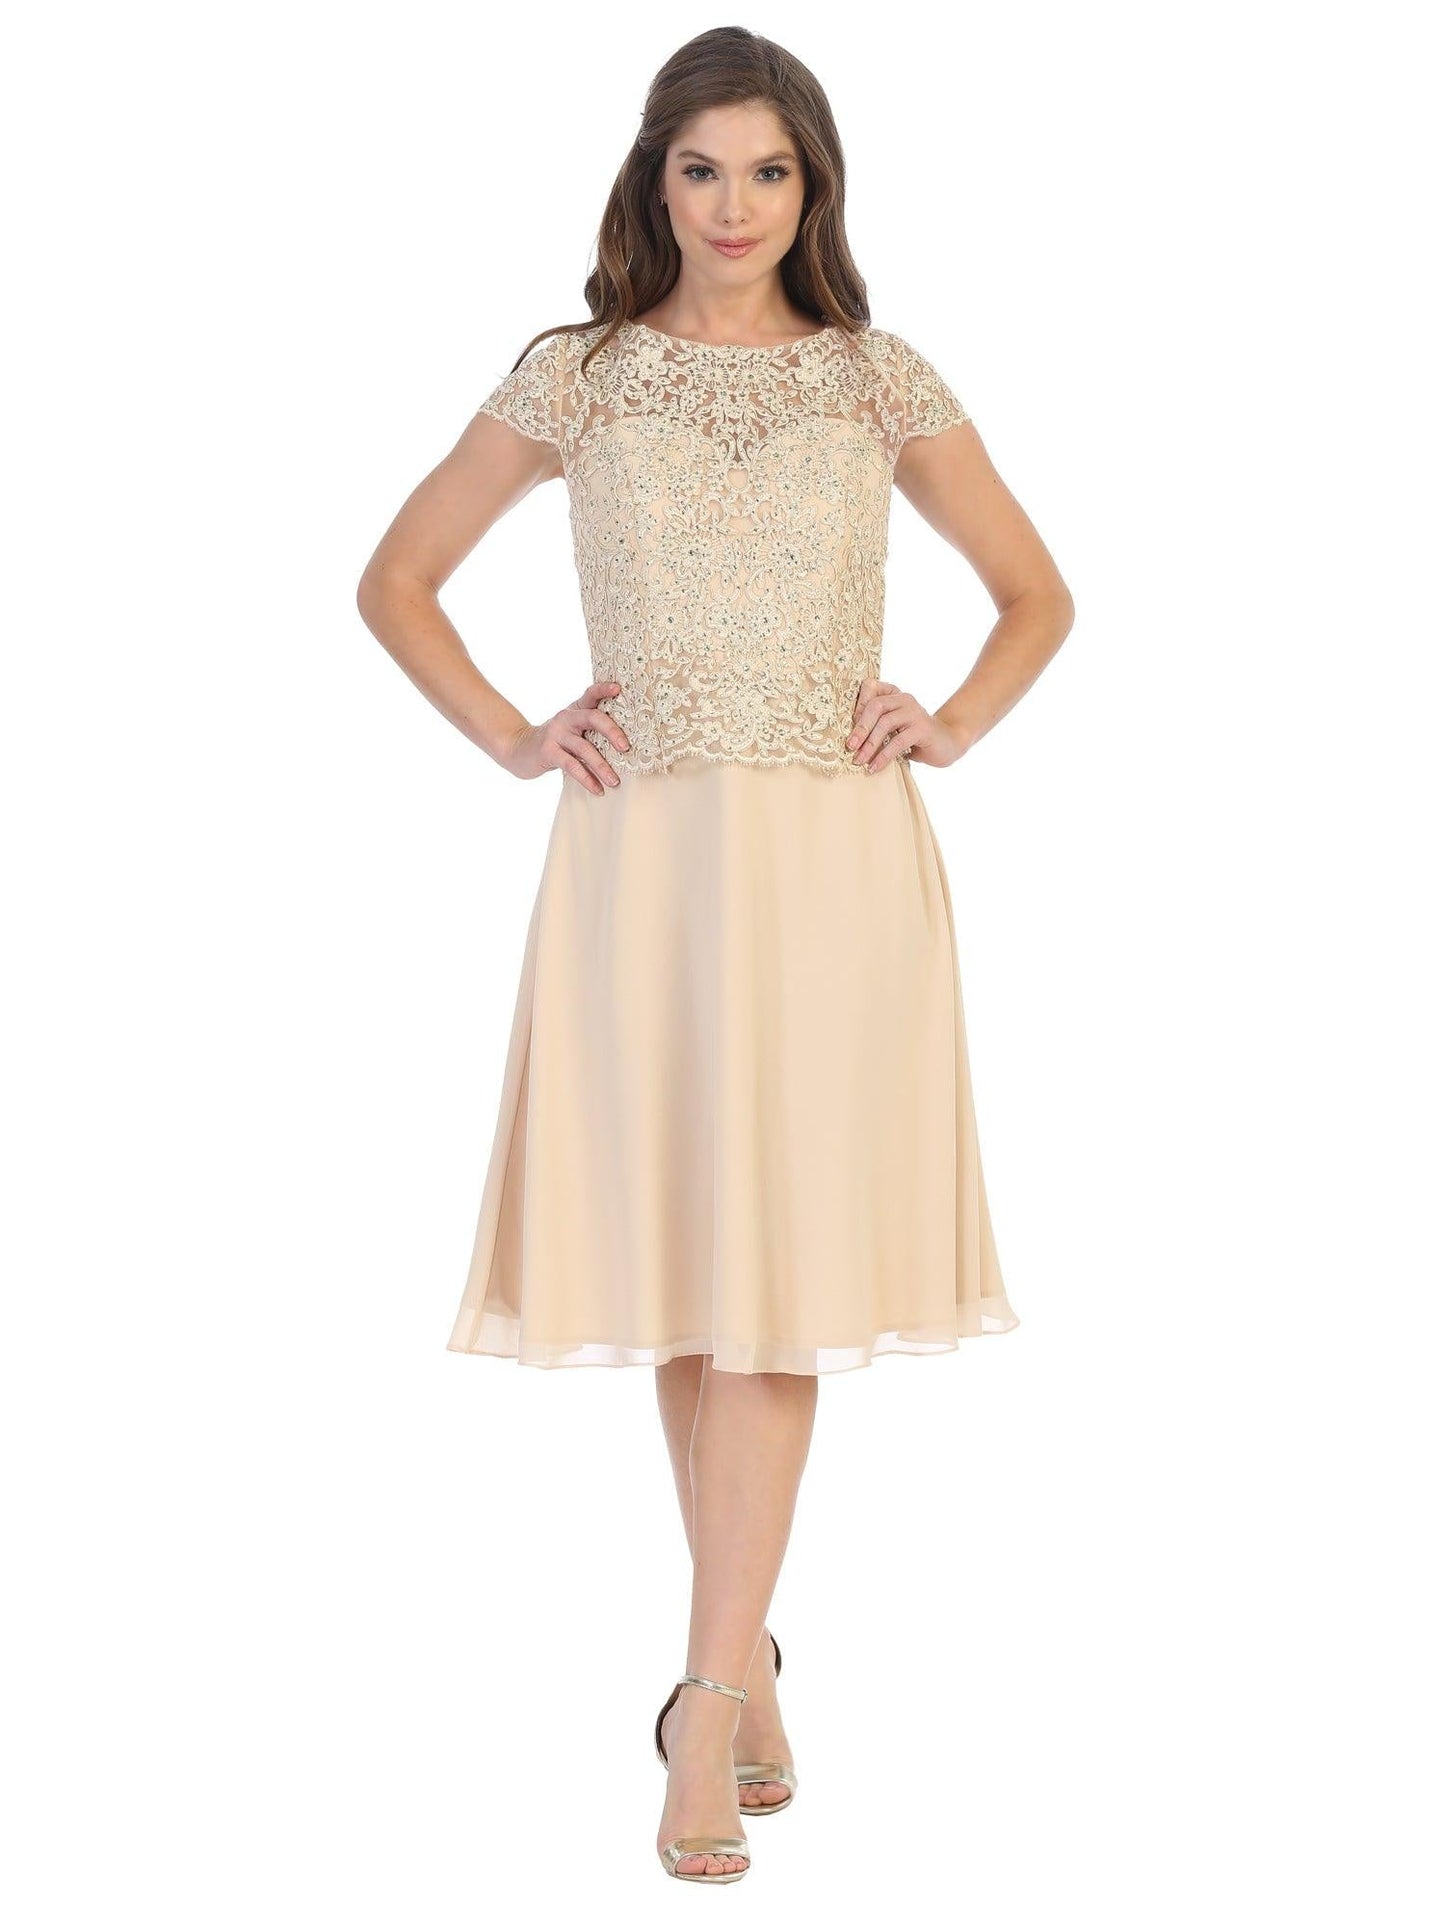 Short Sleeve Mother of the Bride Cocktail Dress - The Dress Outlet